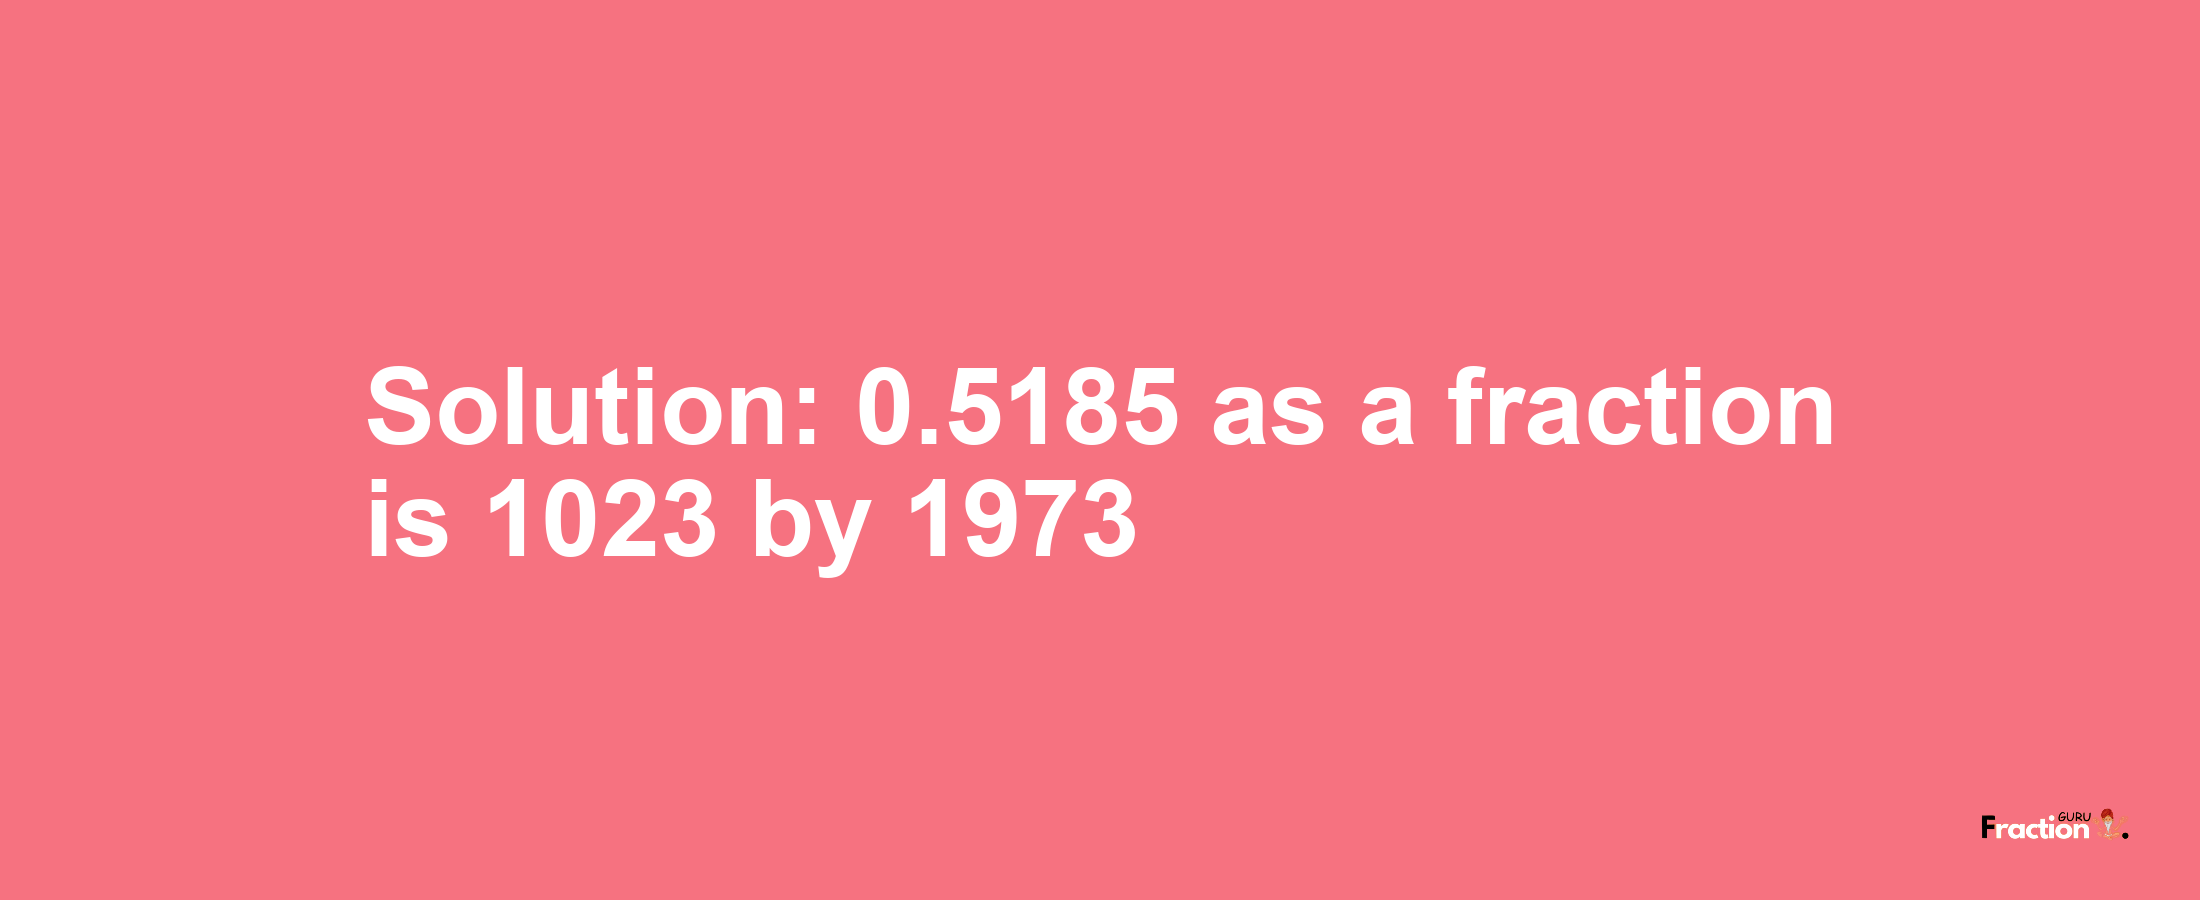 Solution:0.5185 as a fraction is 1023/1973